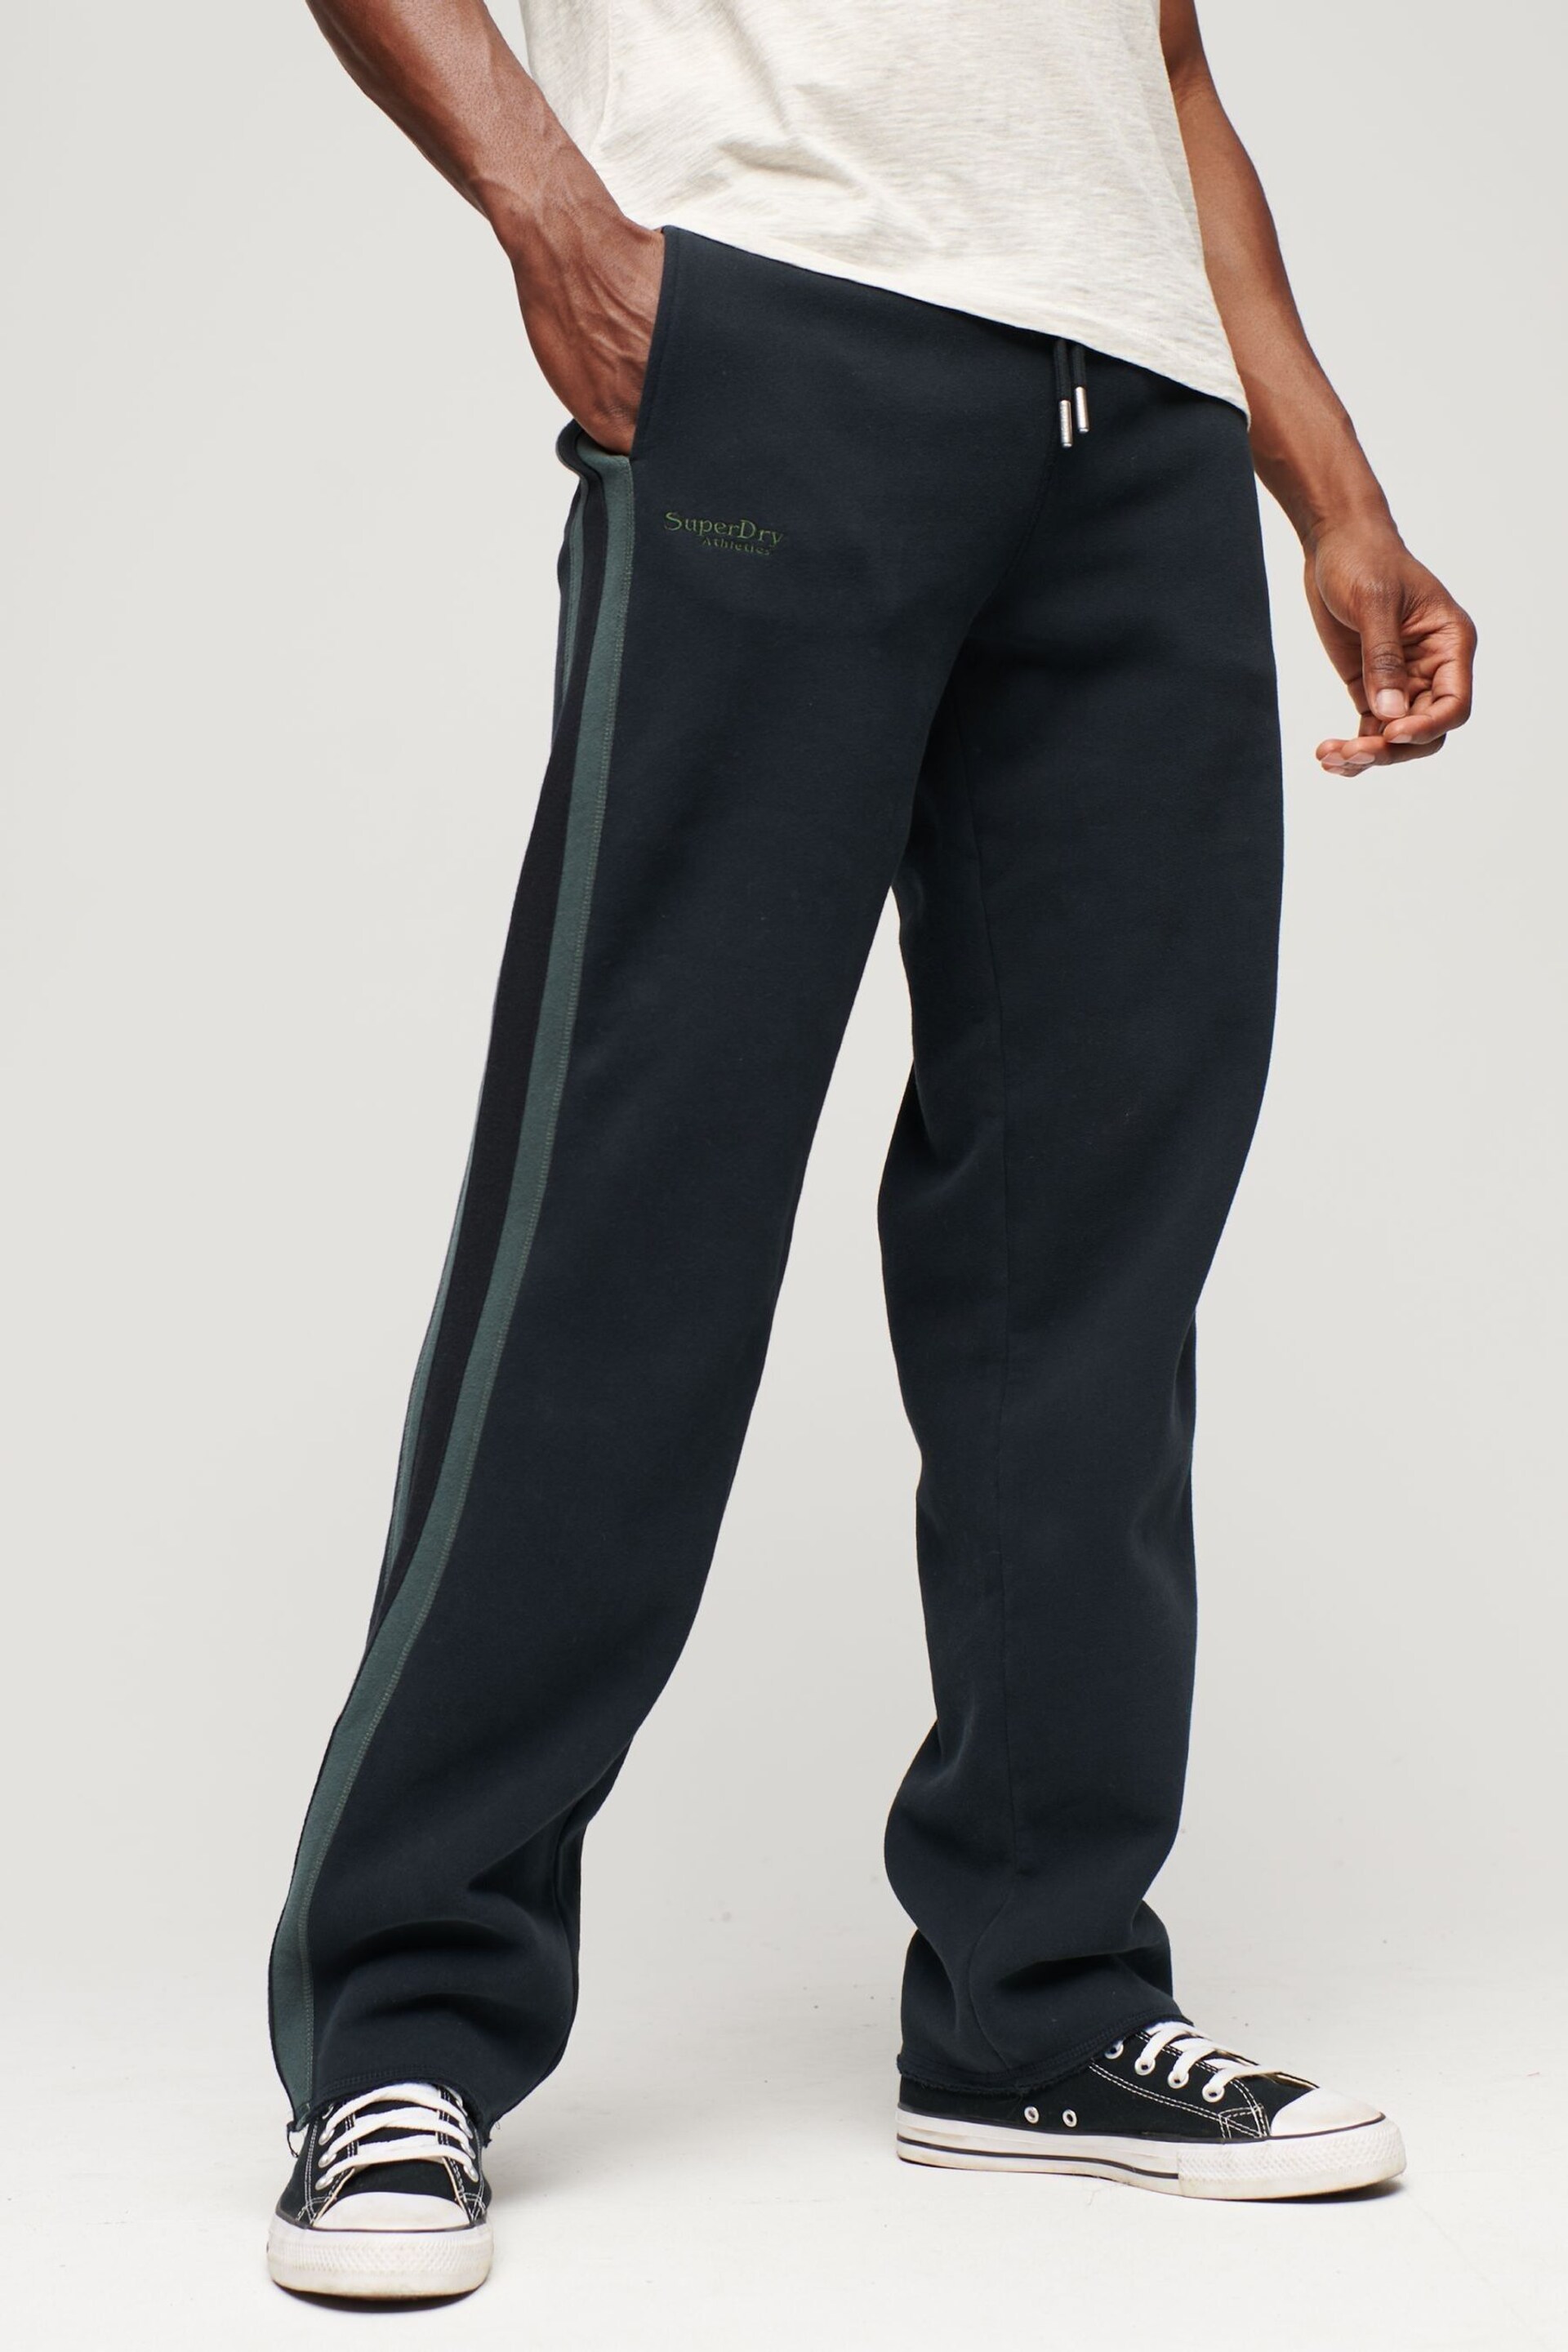 Superdry Black Essential Straight Joggers - Image 1 of 1